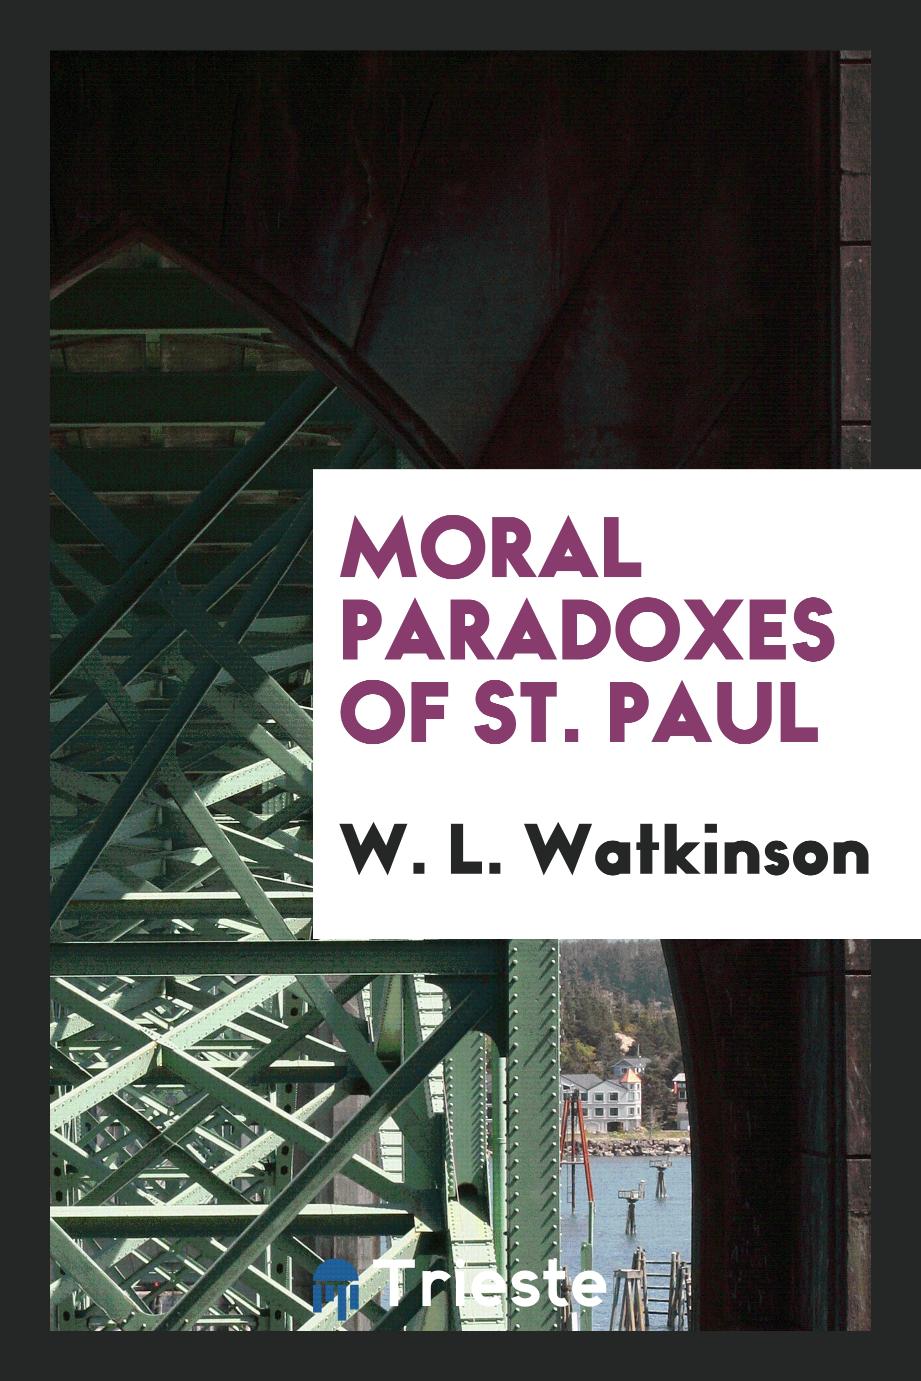 Moral paradoxes of St. Paul